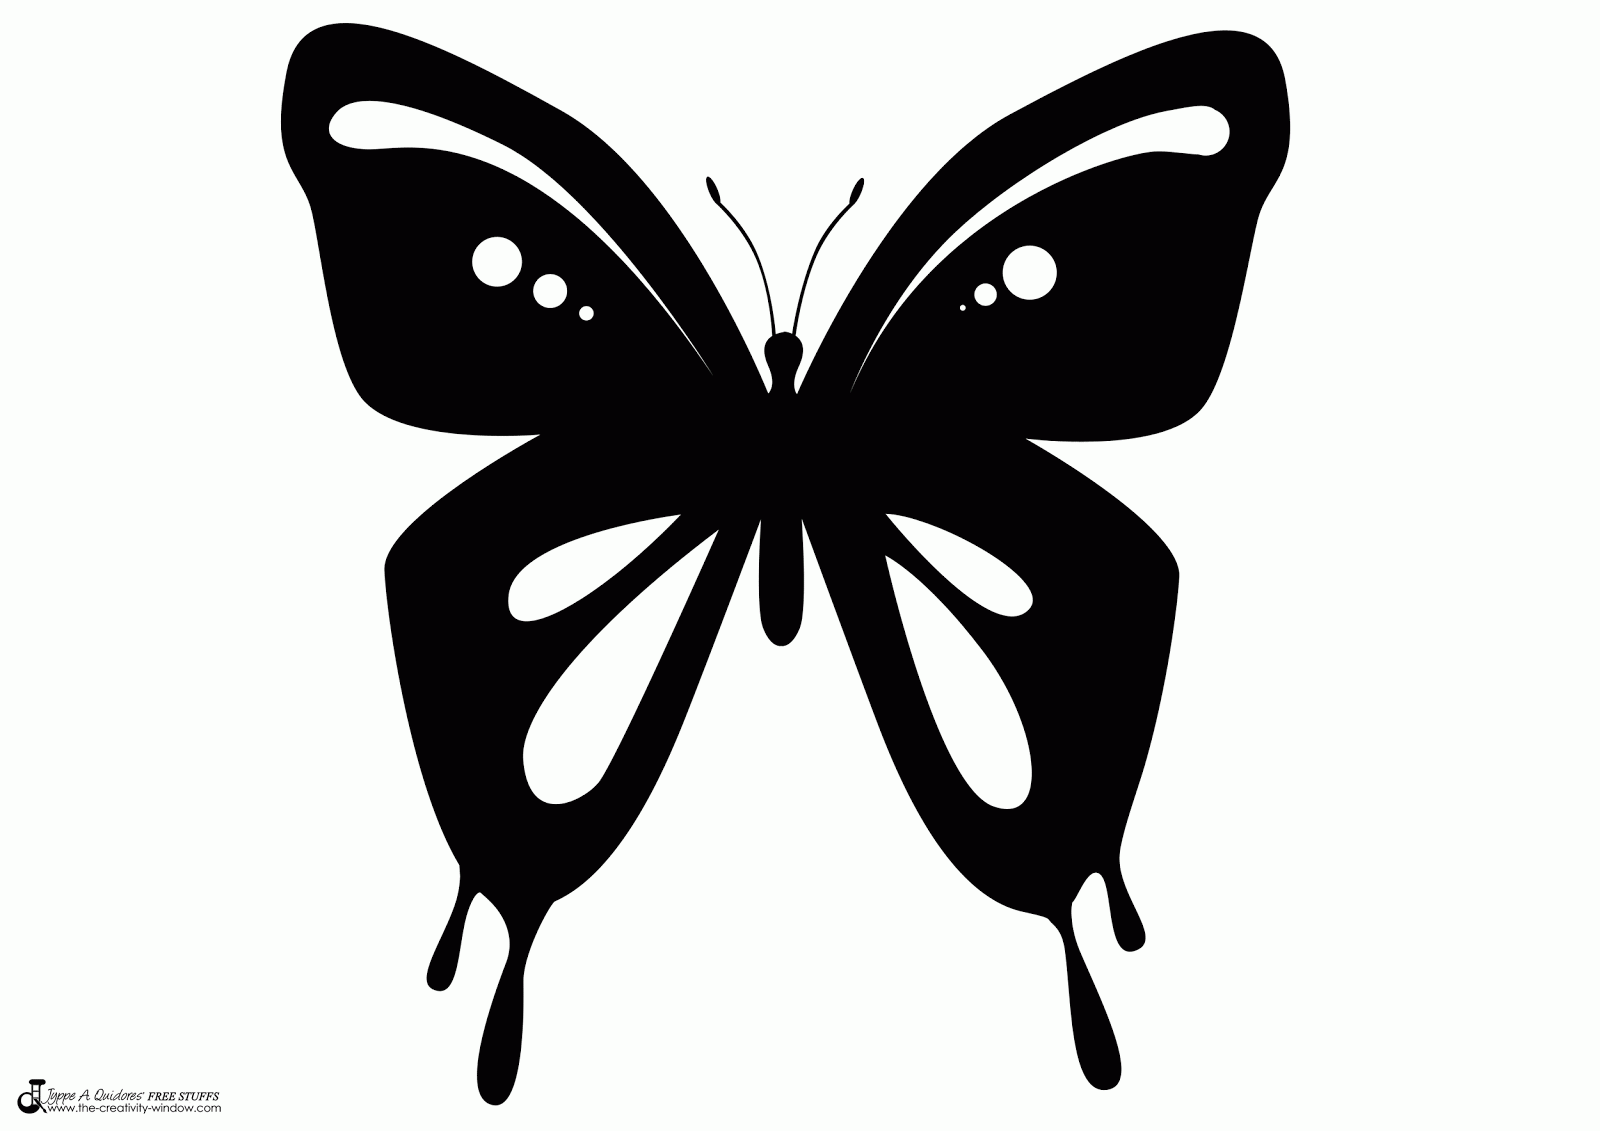 butterfly silhouette - Google Search | Graphic Design | Graphics 